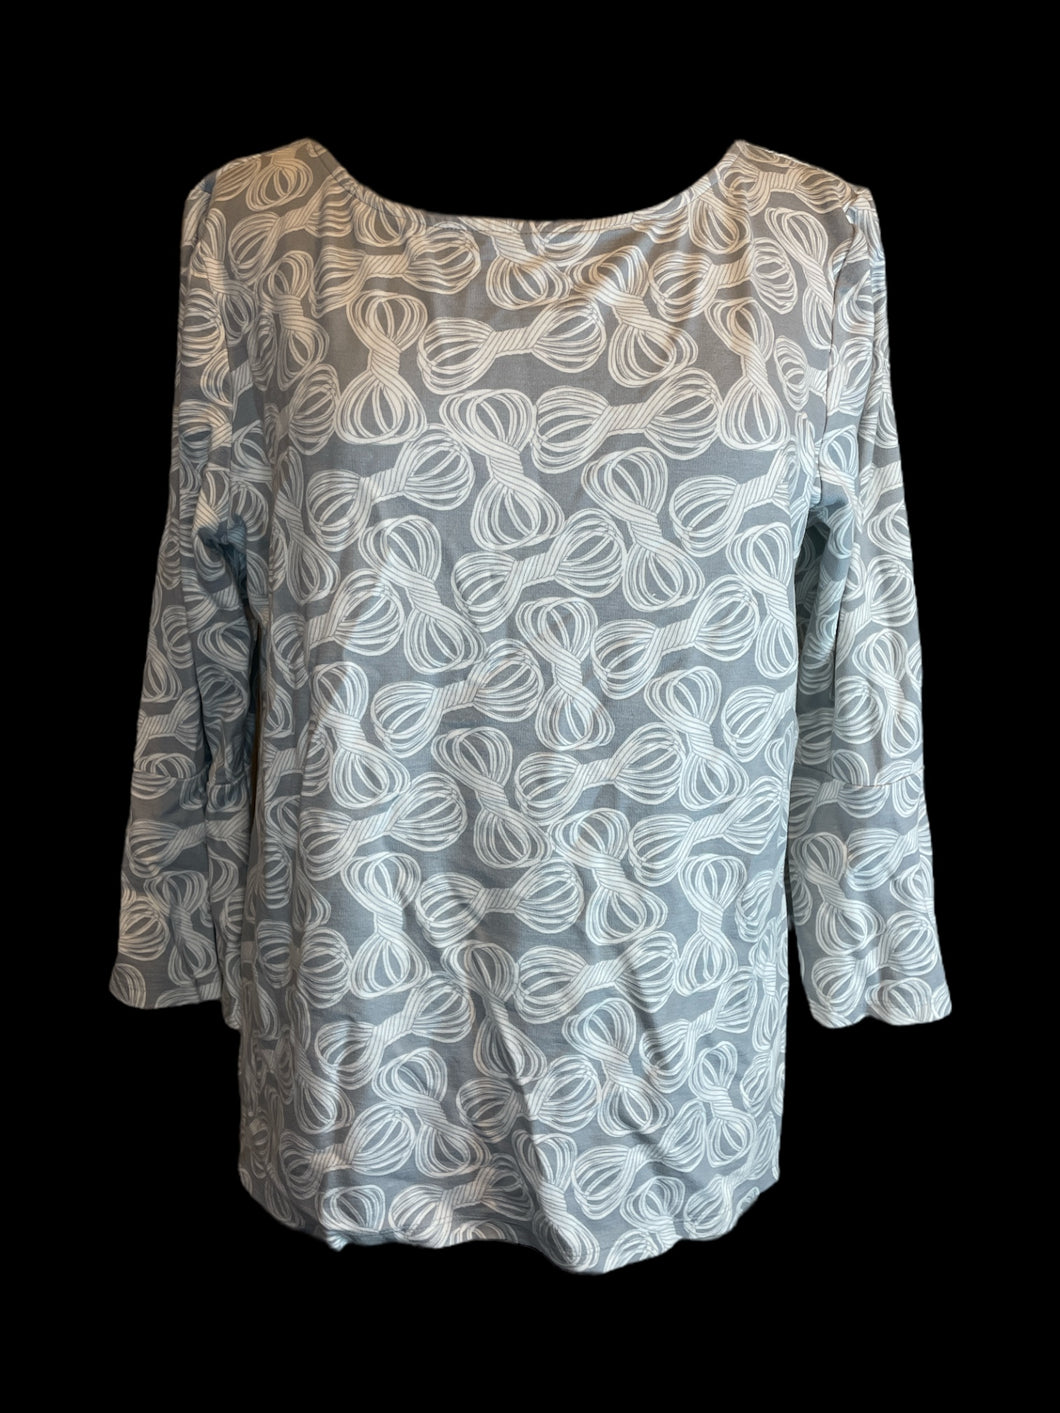 0X Grey & white rope pattern 3/4 sleeve scoop neck top w/ ruffle cuffs